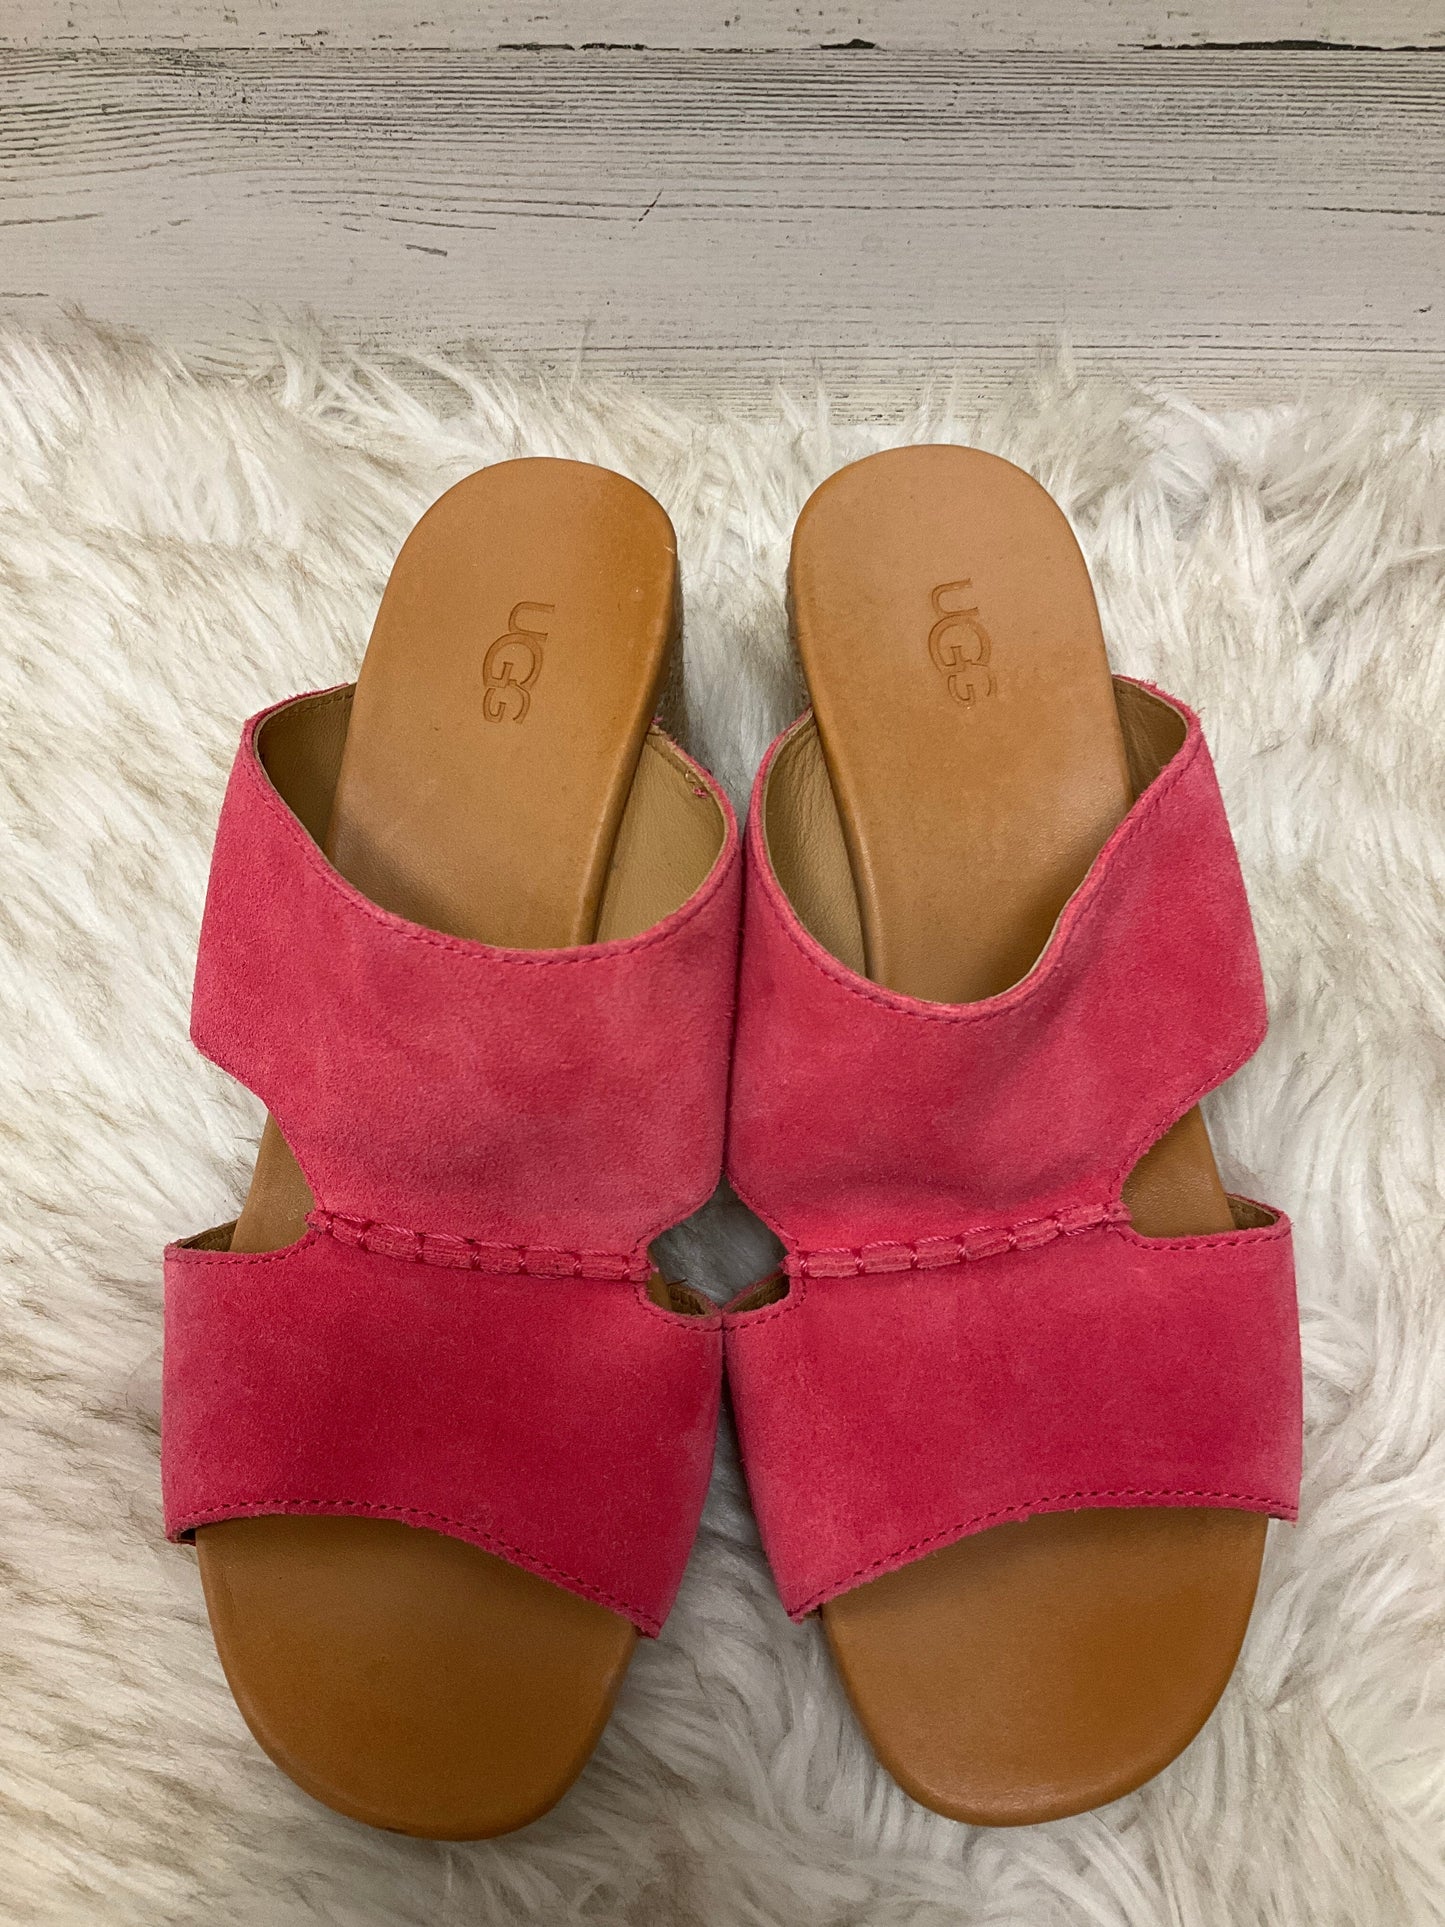 Sandals Heels Wedge By Ugg  Size: 7.5